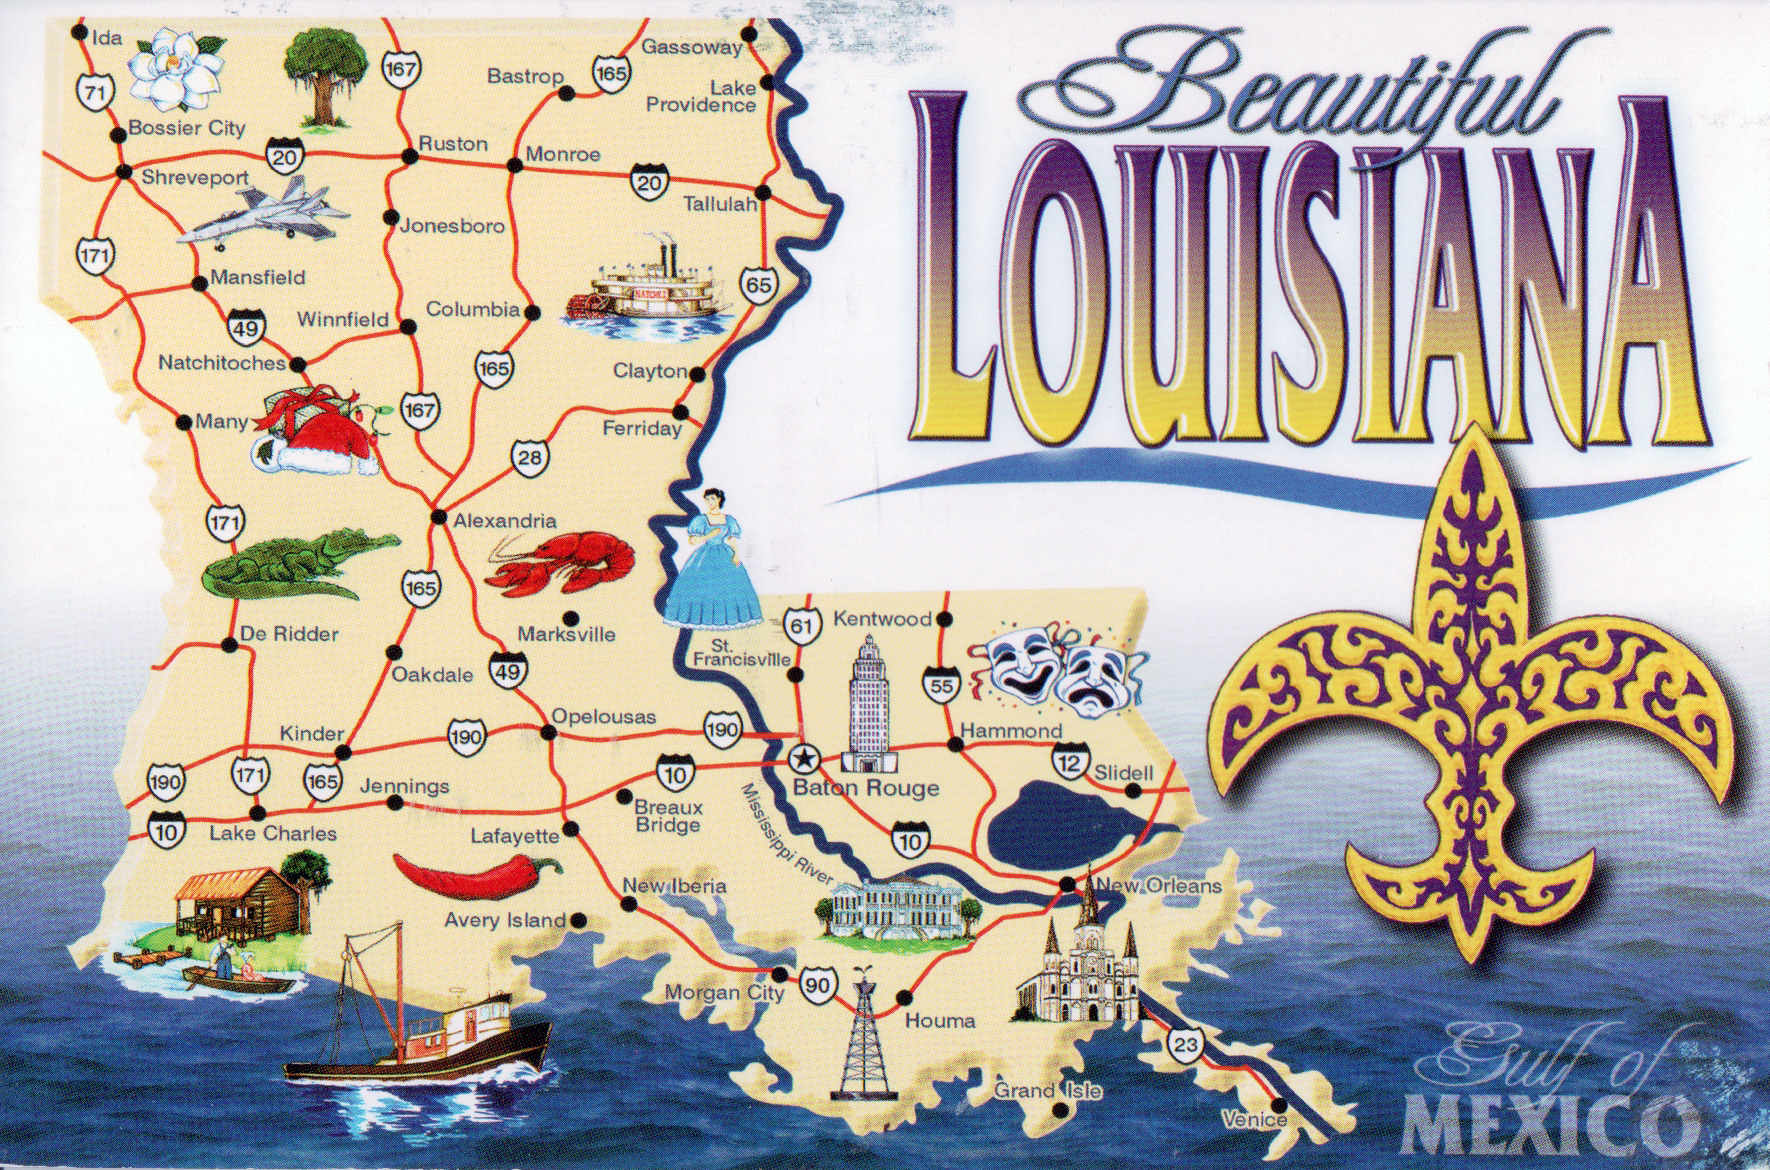 Map of Louisiana  Louisiana map, Louisiana, Louisiana state map